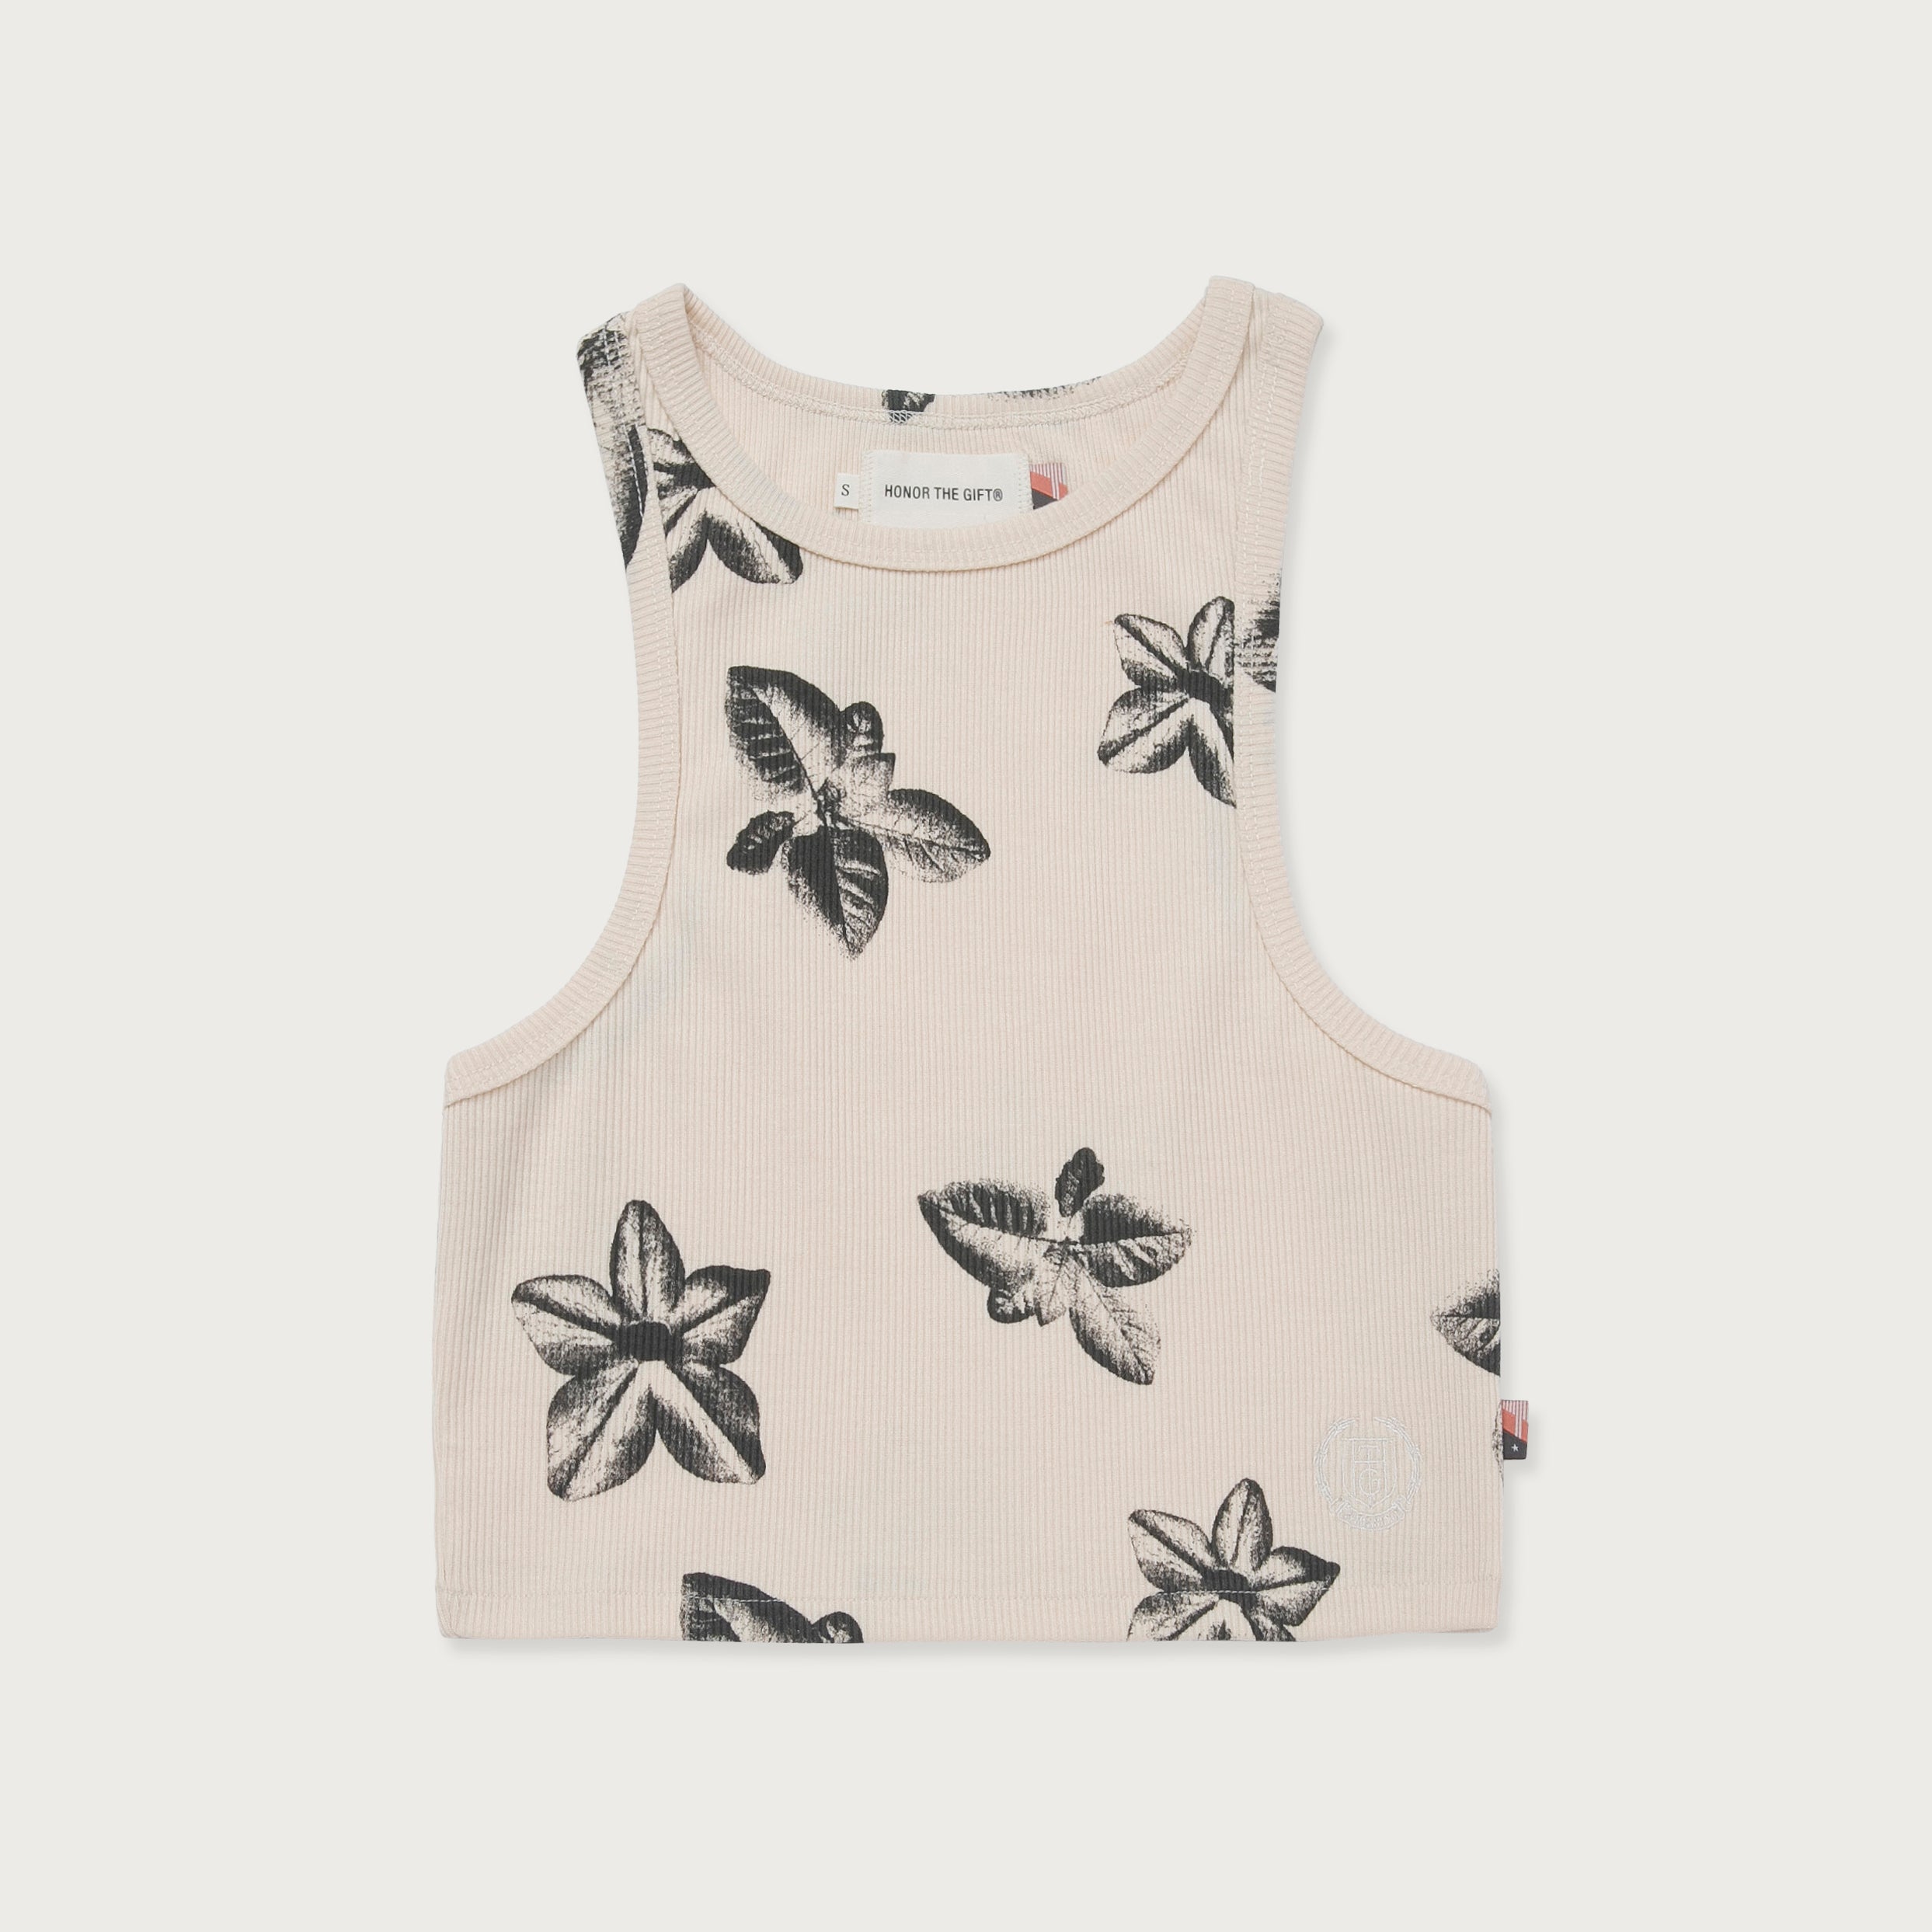 Lace-trimmed Ribbed Tank Top - Cream/floral - Ladies